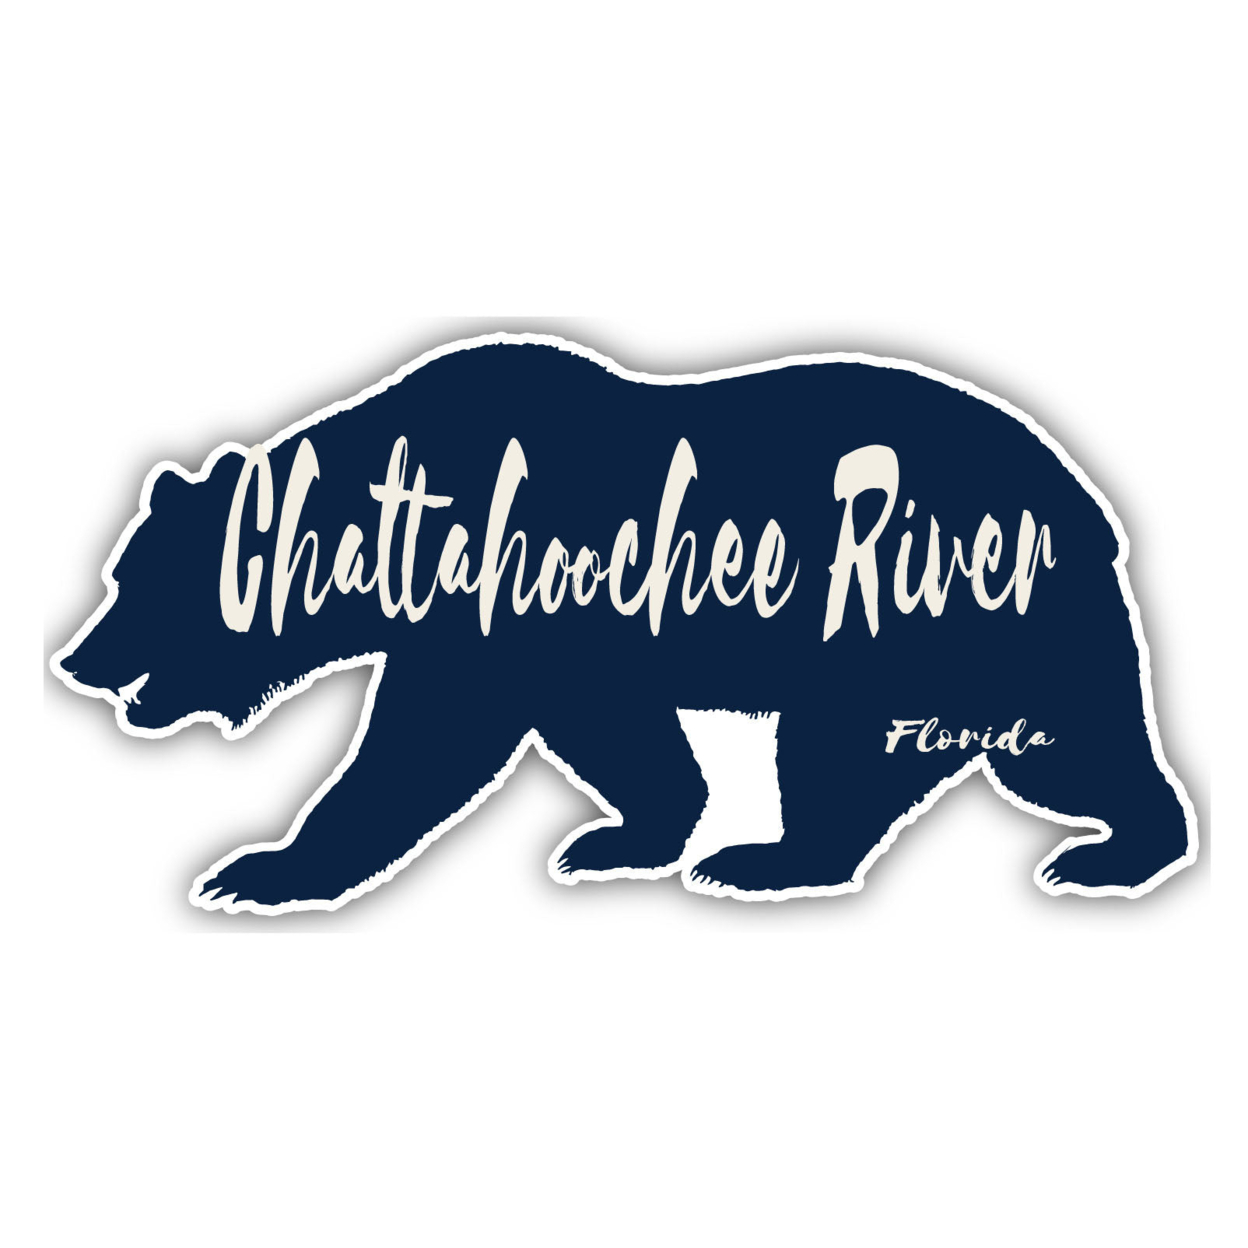 Chattahoochee River Florida Souvenir Decorative Stickers (Choose Theme And Size) - 4-Pack, 8-Inch, Bear